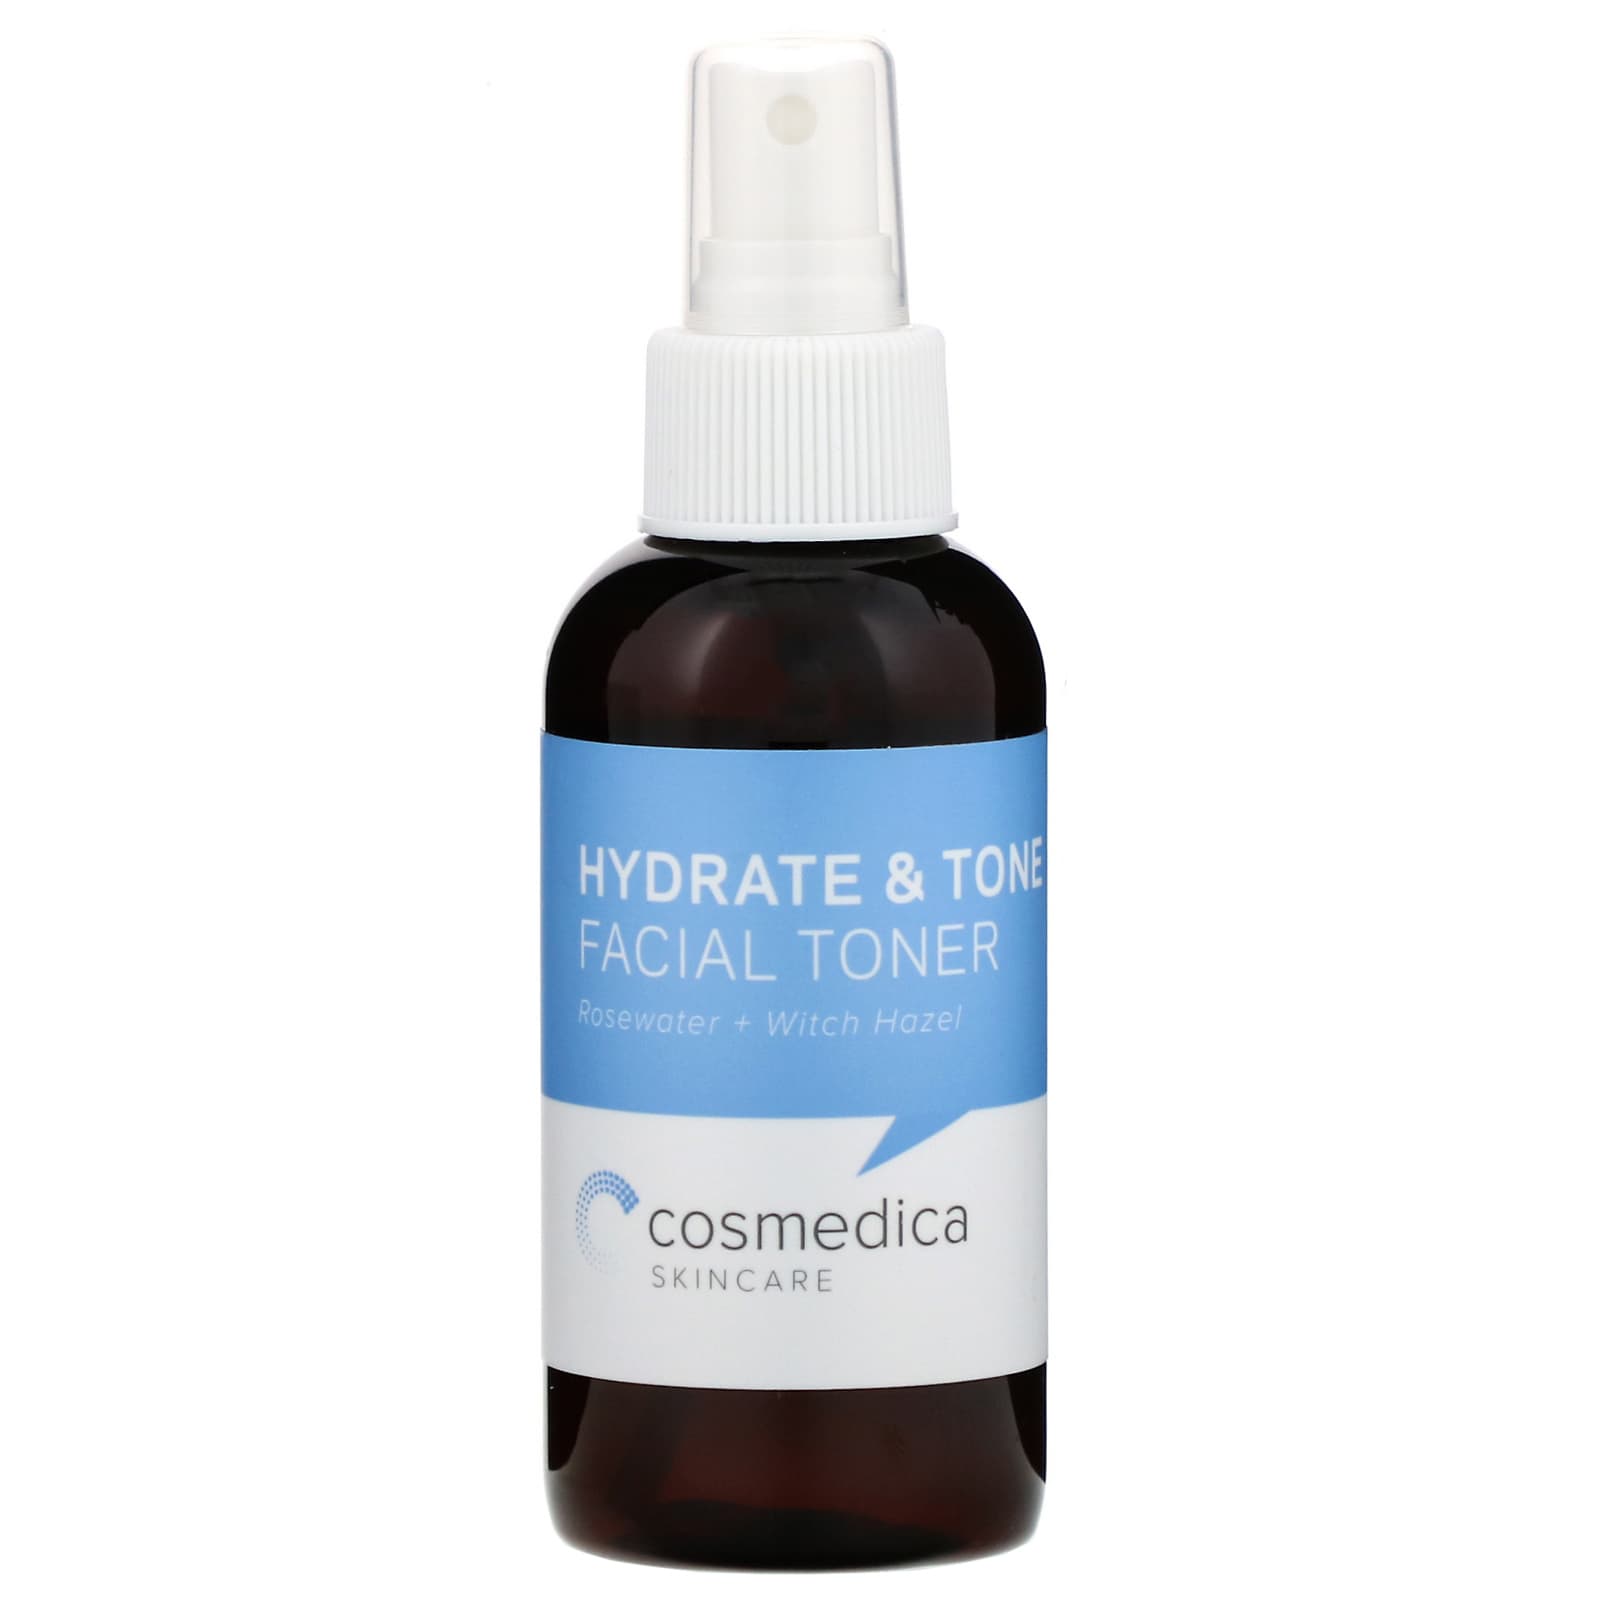 Cosmedica Skincare, Hydrate & Tone Facial Toner, Rosewater + Witch Hazel (120 ml)